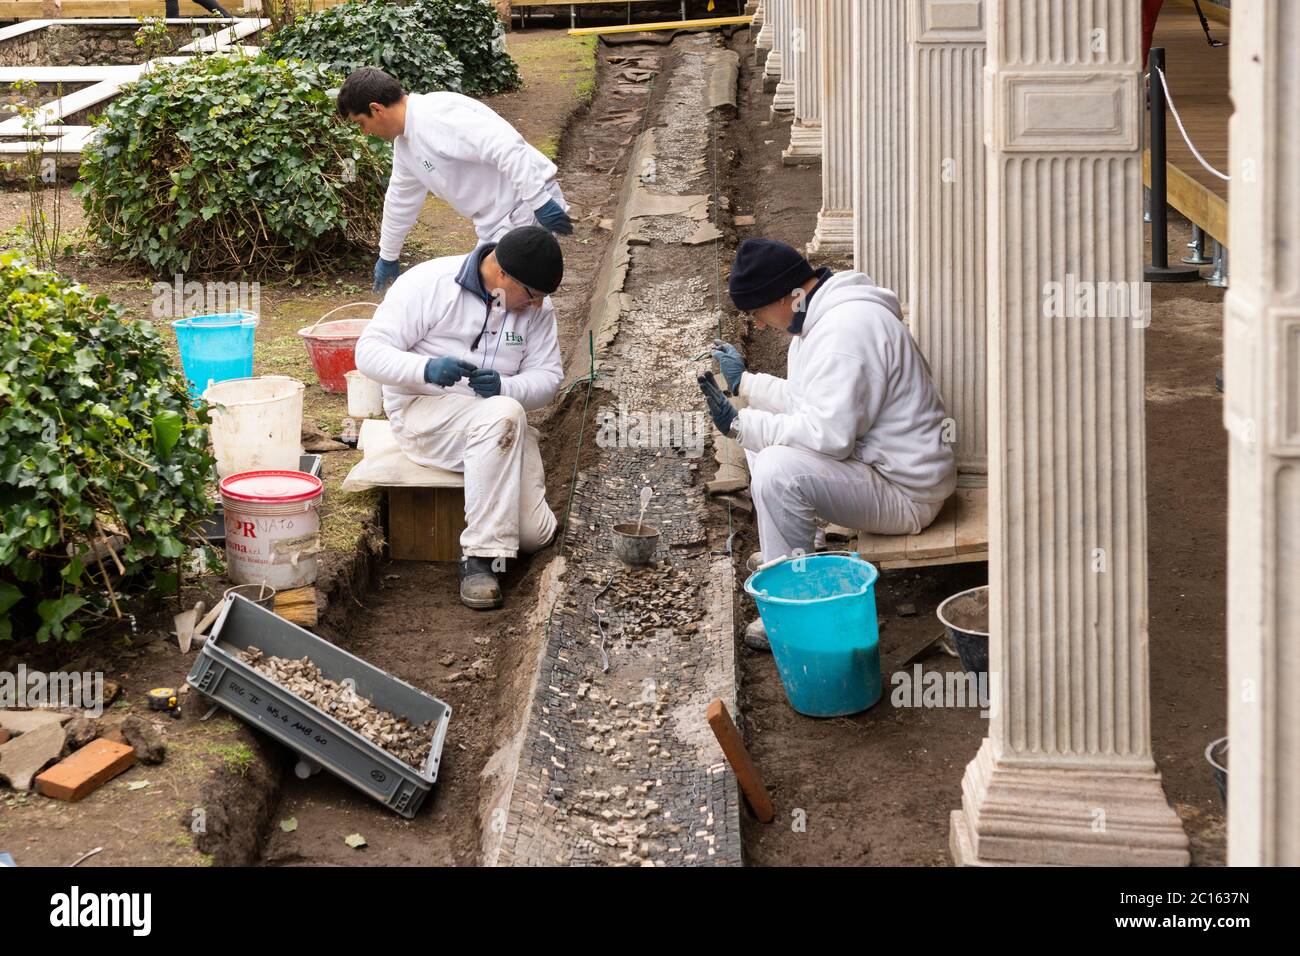 Archaeologists repairing and restoring mosaic tiling in the House of Giulia Felice (Villa di Giulia Felice) in the ancient city of Pompeii, Italy Stock Photo